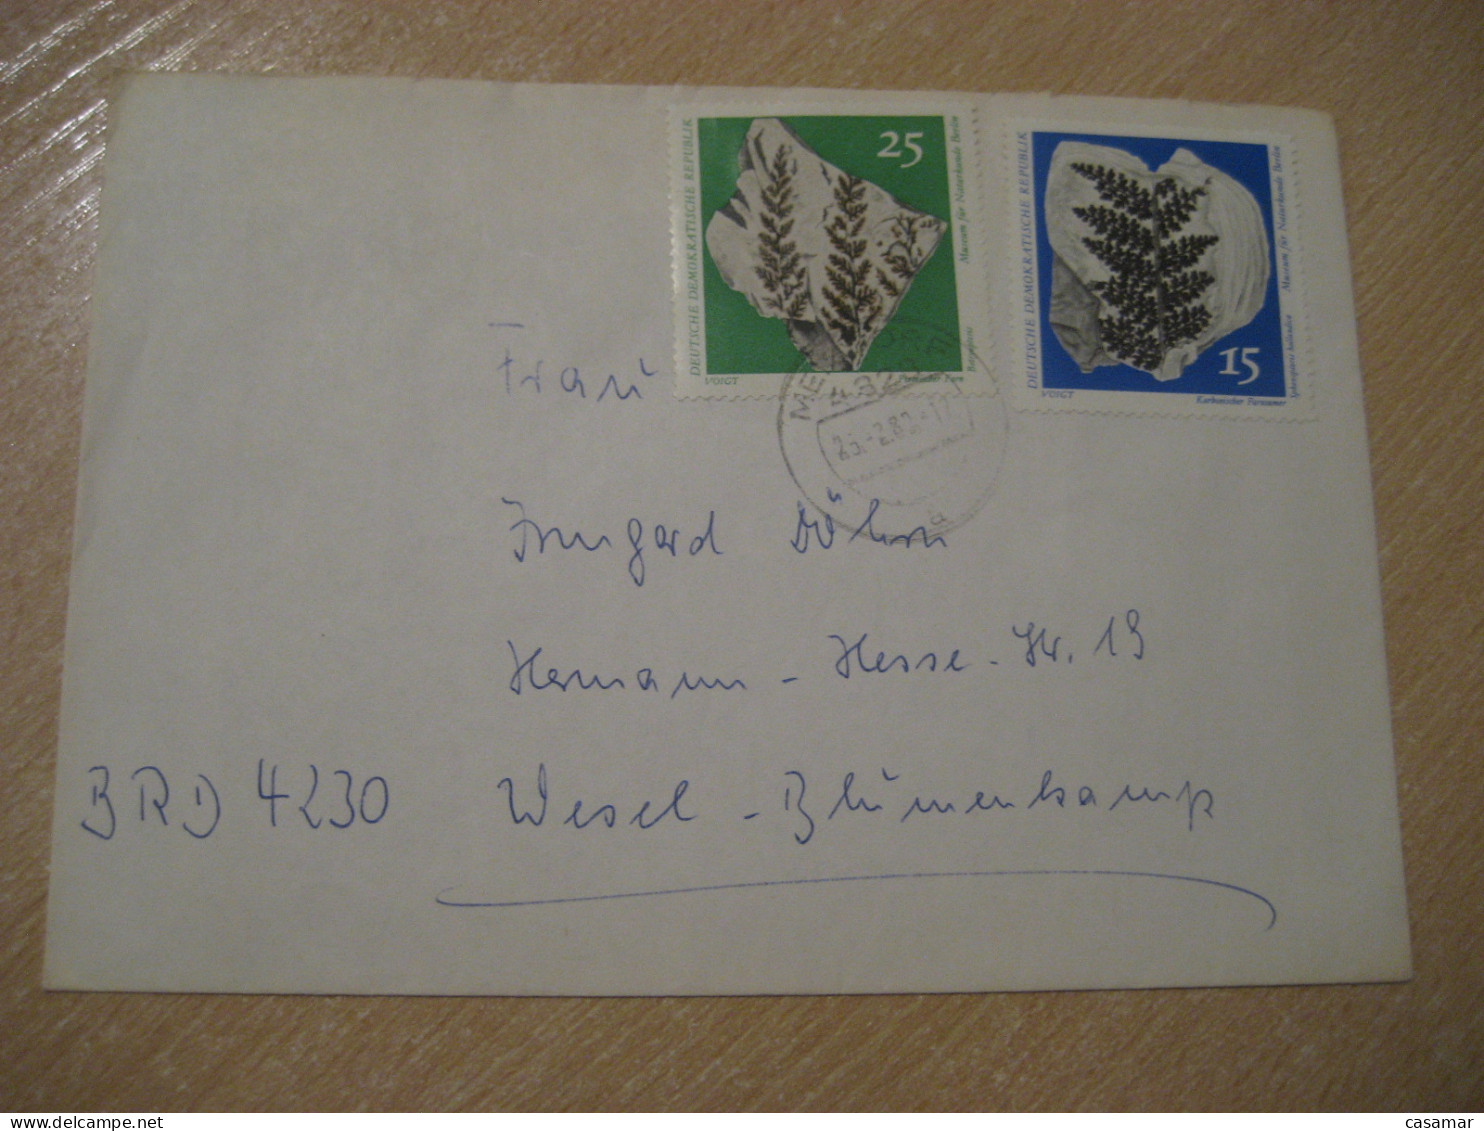 MEISDORF 198? To Wesel Cancel Cover DDR GERMANY Fossil Fossils Animals Fossiles Geology Geologie - Fossili